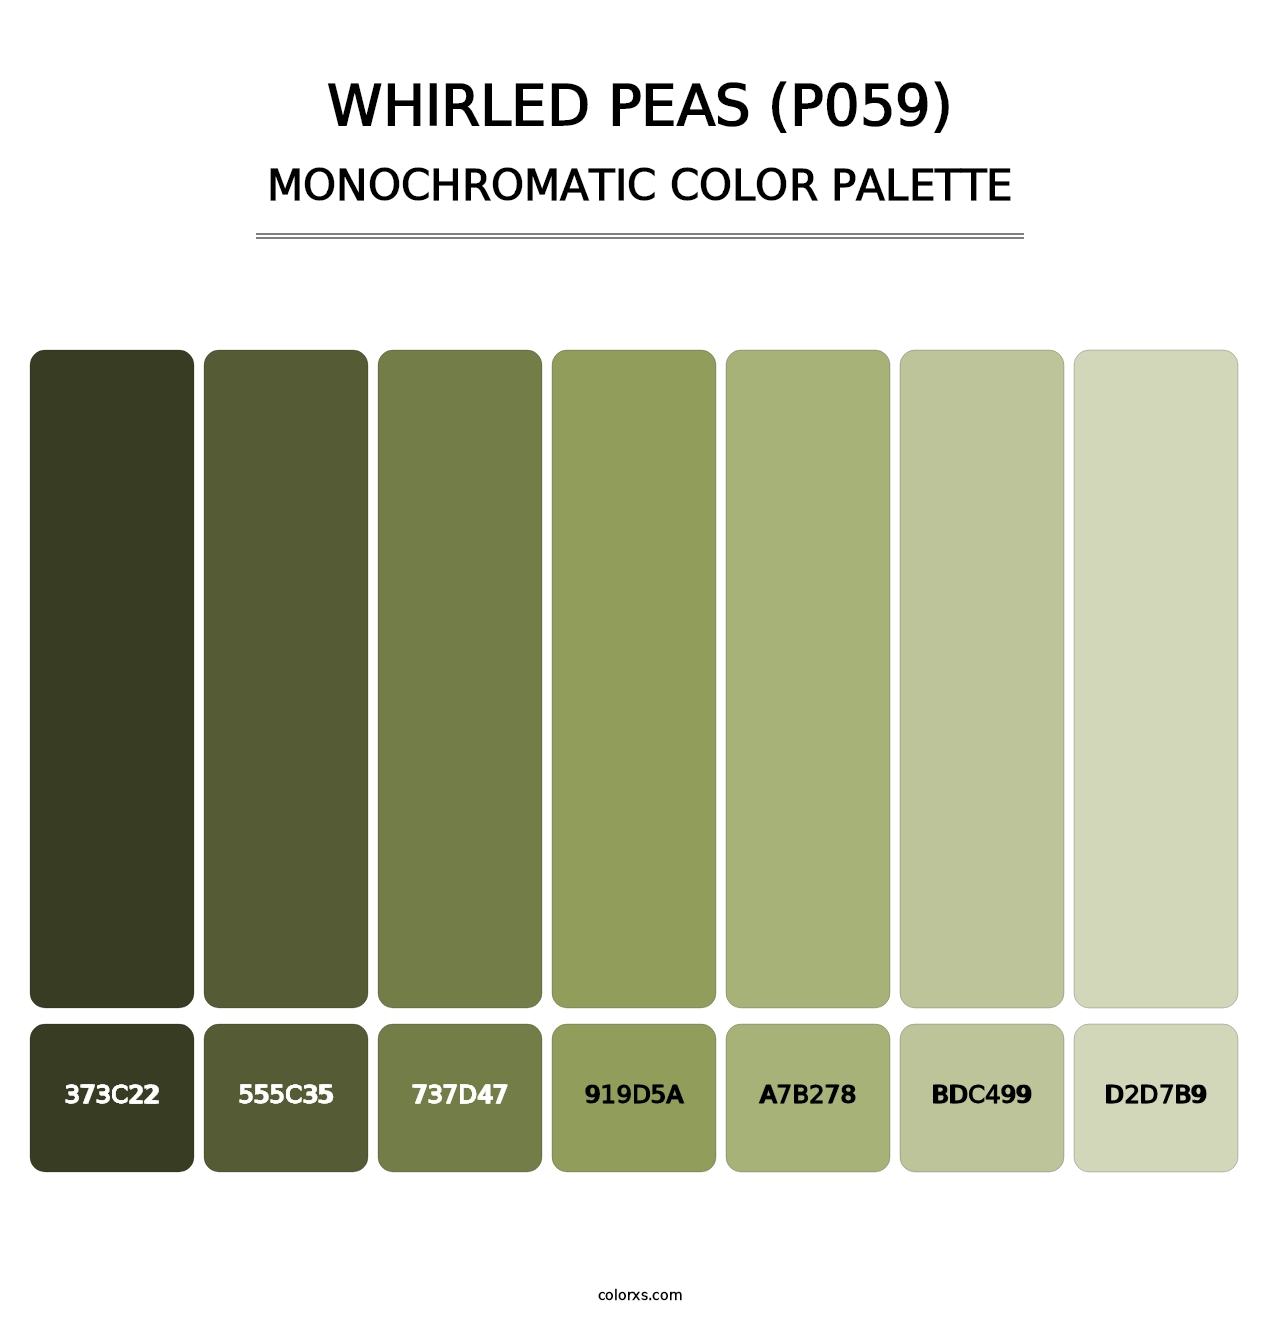 Whirled Peas (P059) - Monochromatic Color Palette